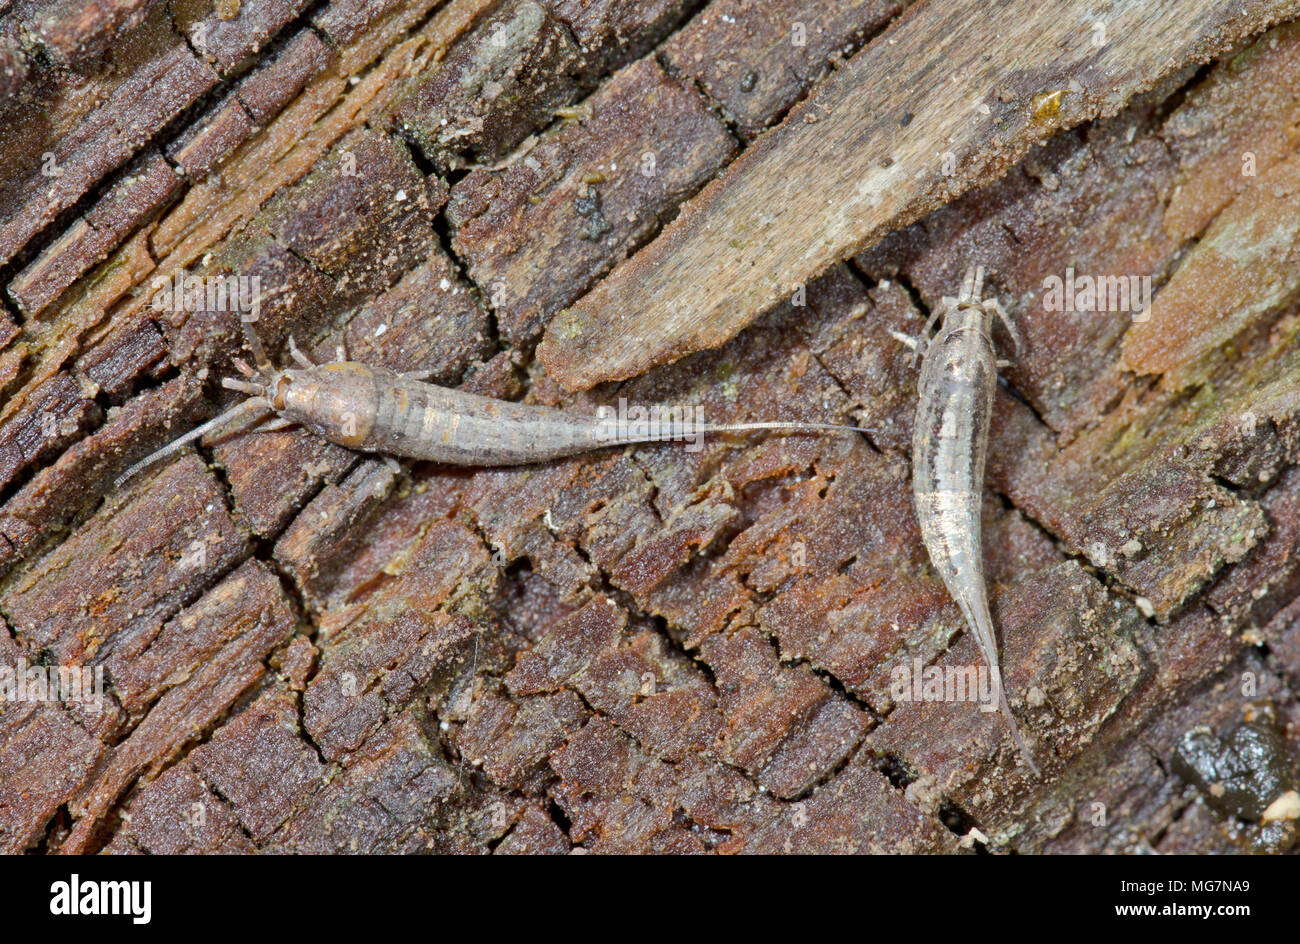 Three tailed Bristletails (Dilta species most likely littoralis) Sussex, UK Stock Photo